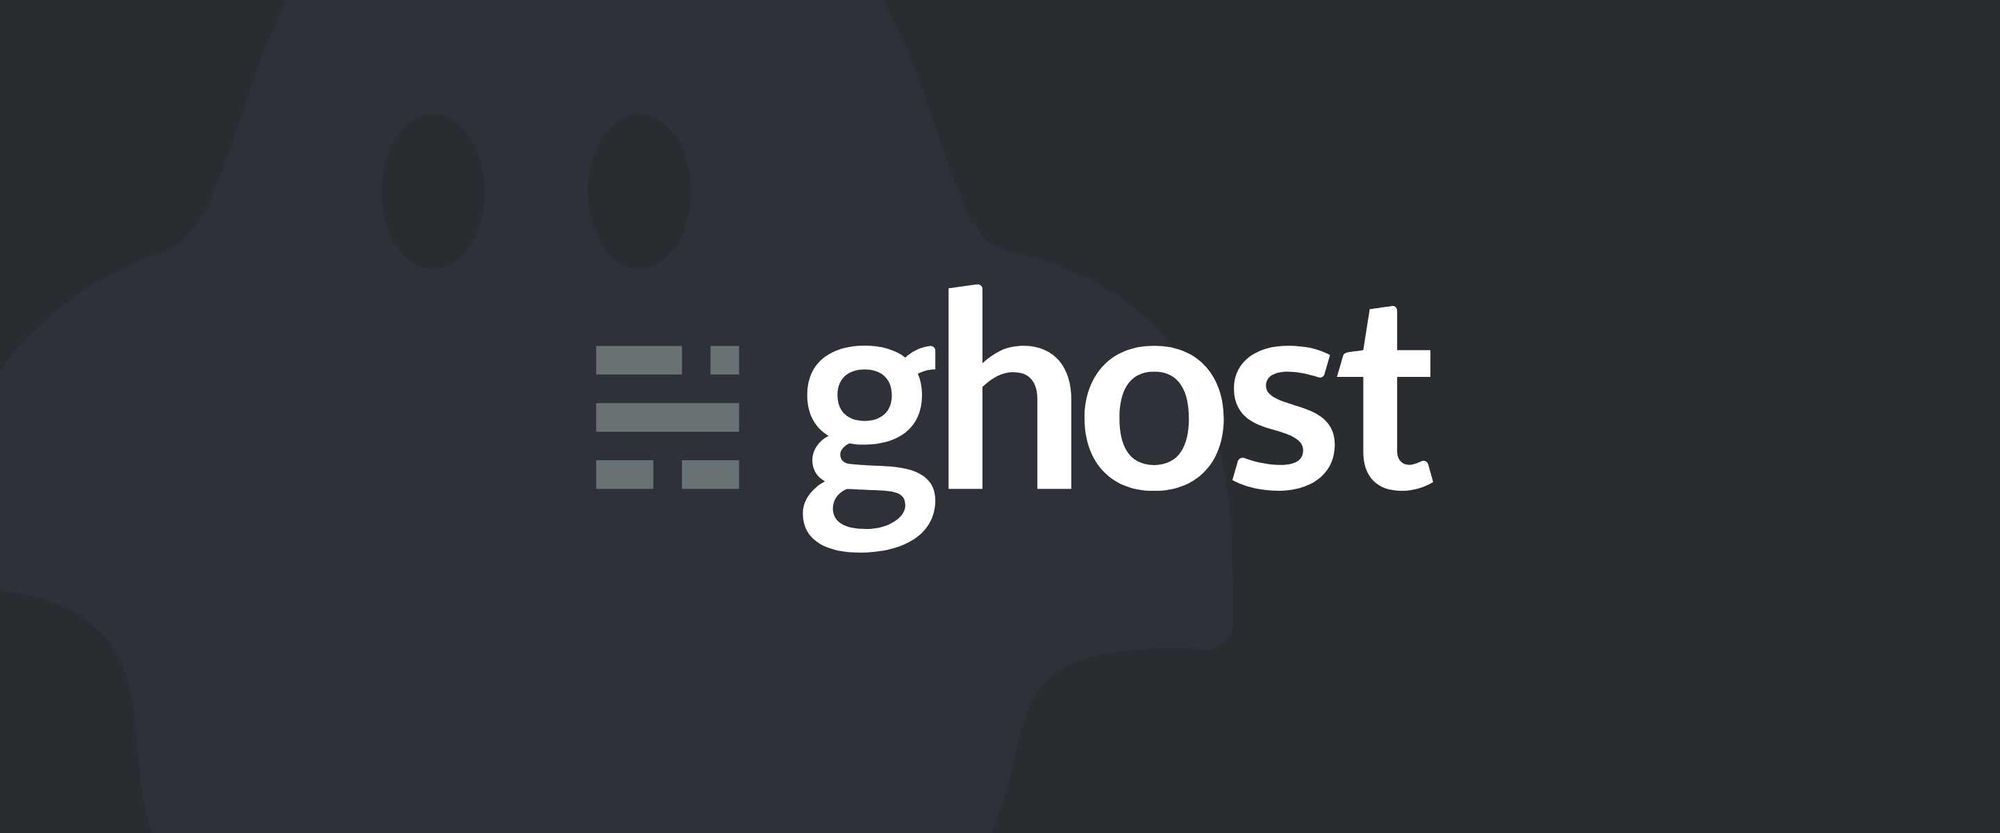 Starting a self-hosted Ghost blog